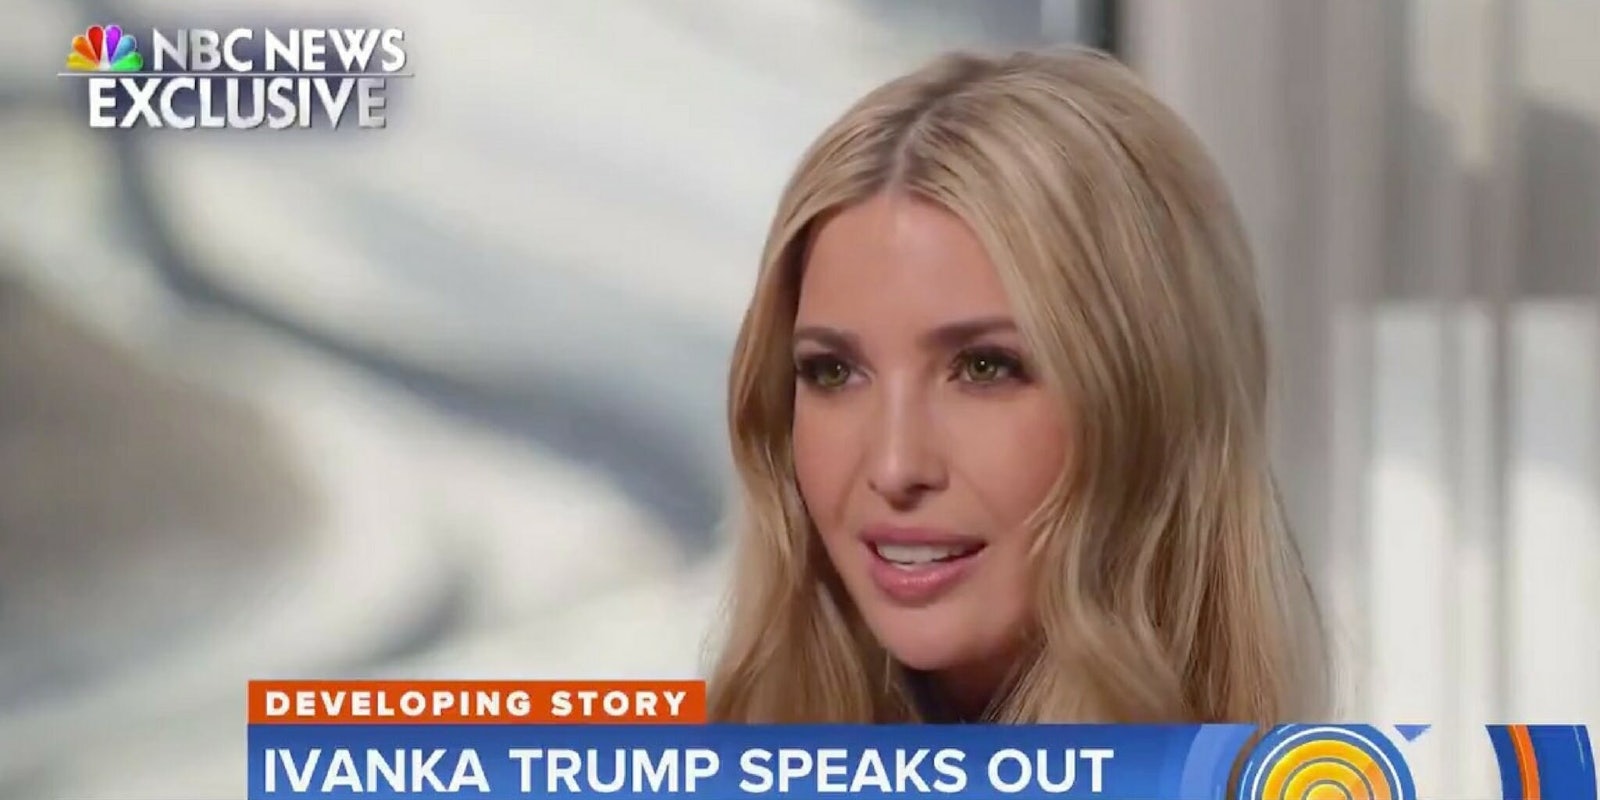 Ivanka Trump addressing allegations of sexual assault against her father on the 'Today' show.